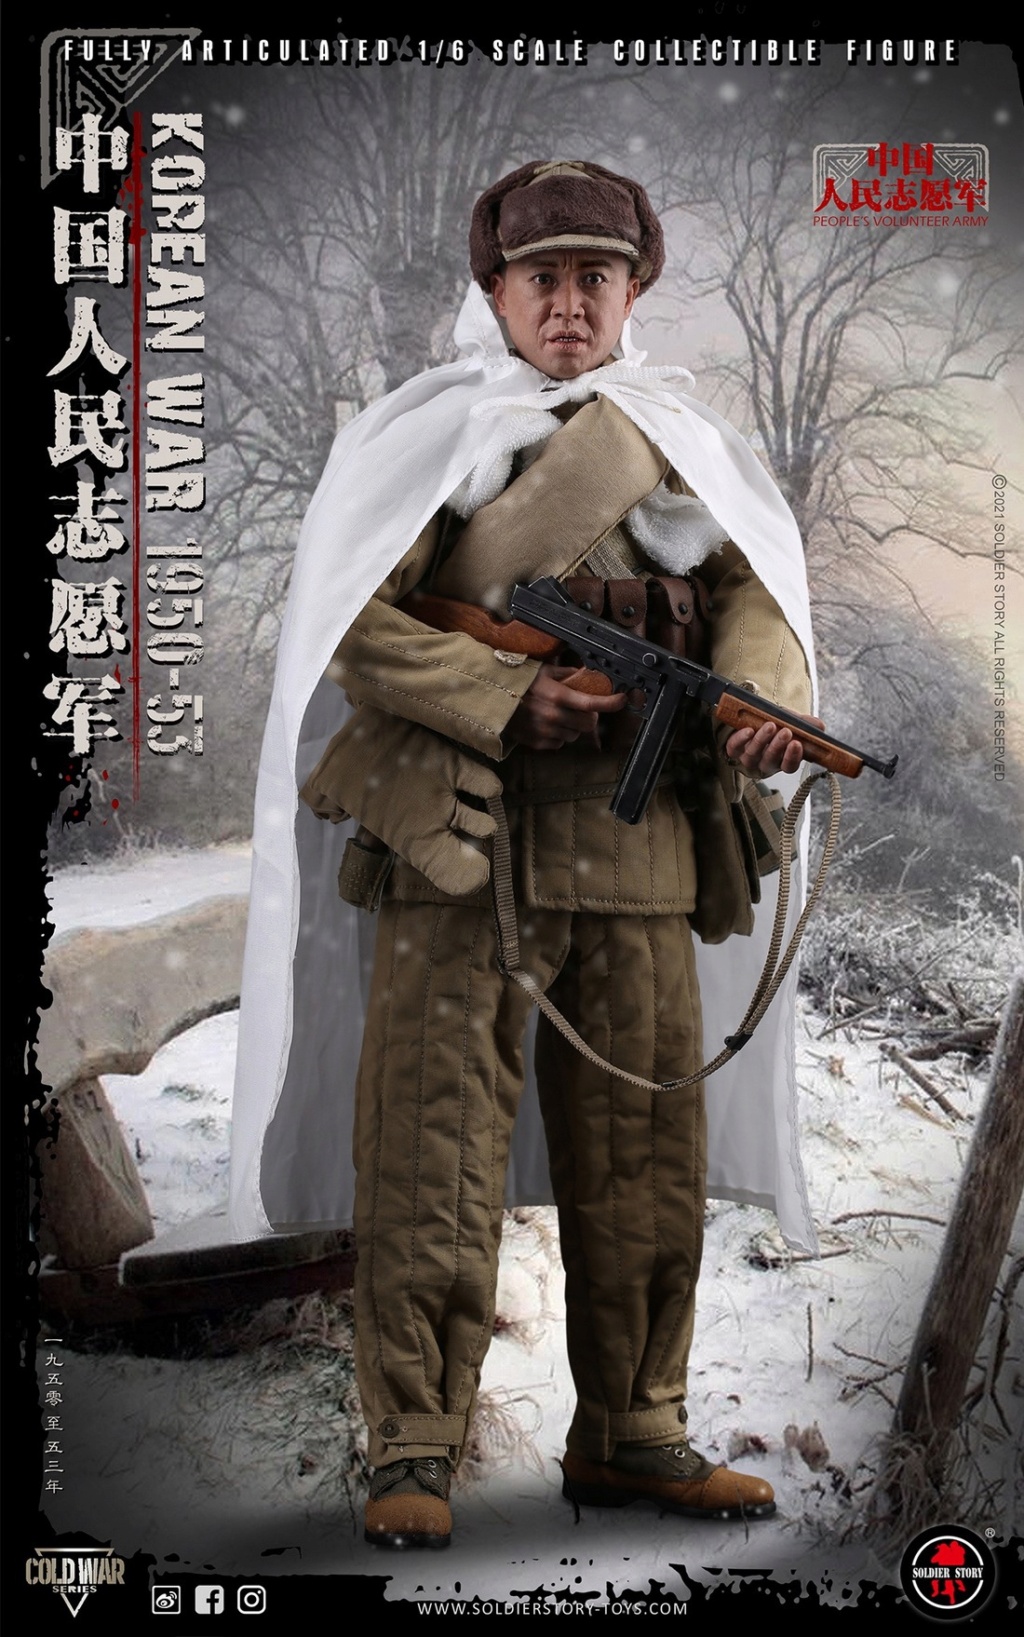 Soldierstory - NEW PRODUCT: SOLDIER STORY: 1/6 Chinese People’s Volunteers 1950-53 Collectible Action Figure (#SS-124) A9a92410